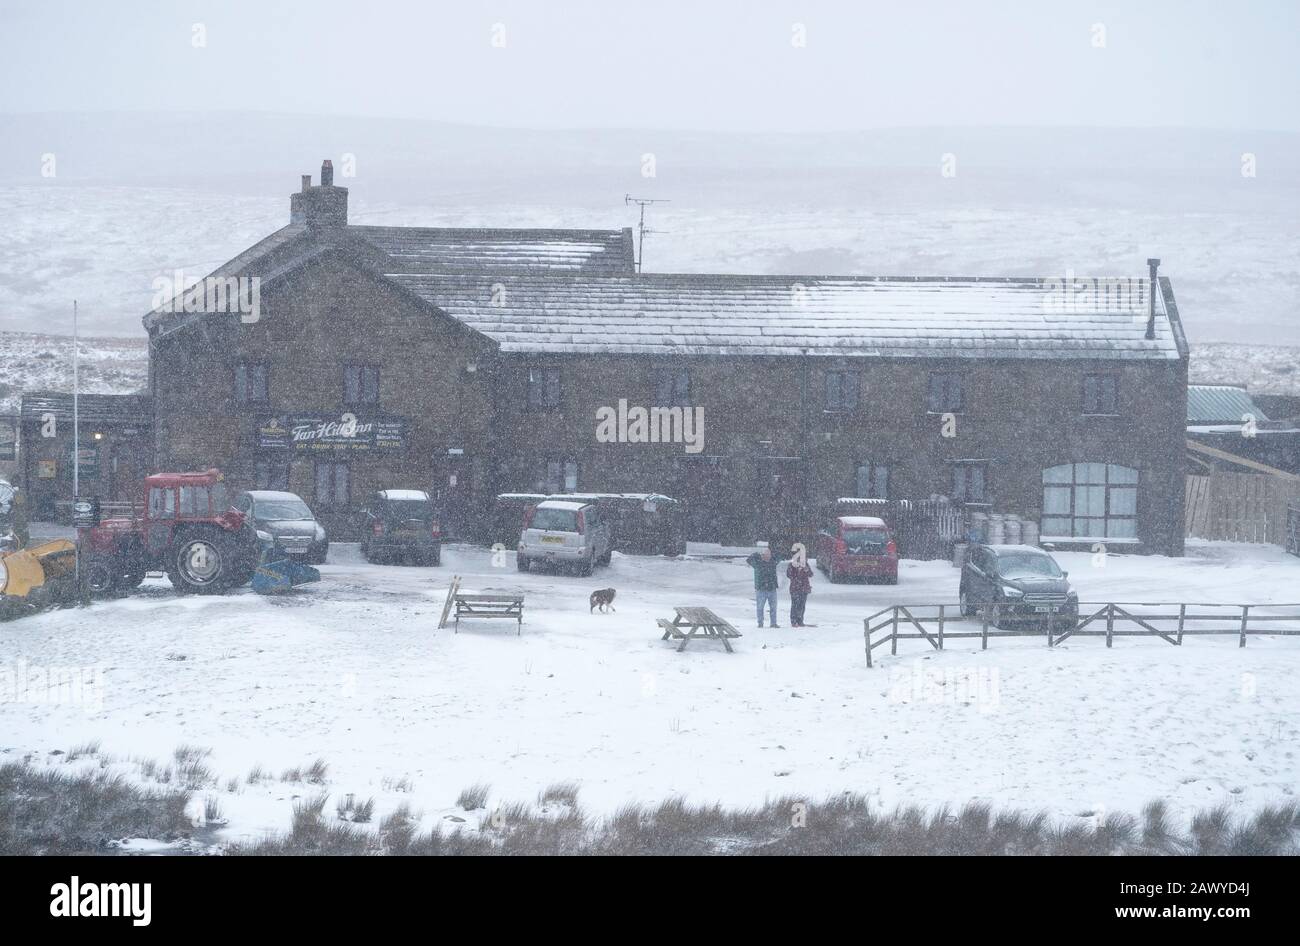 Snowy conditions at the Tan Hill Inn in Reeth in the Yorkshire Dales, weather warnings for wind, snow and ice have been issued across large parts of the country as the UK struggles to recover from the battering from Storm Ciara. Stock Photo